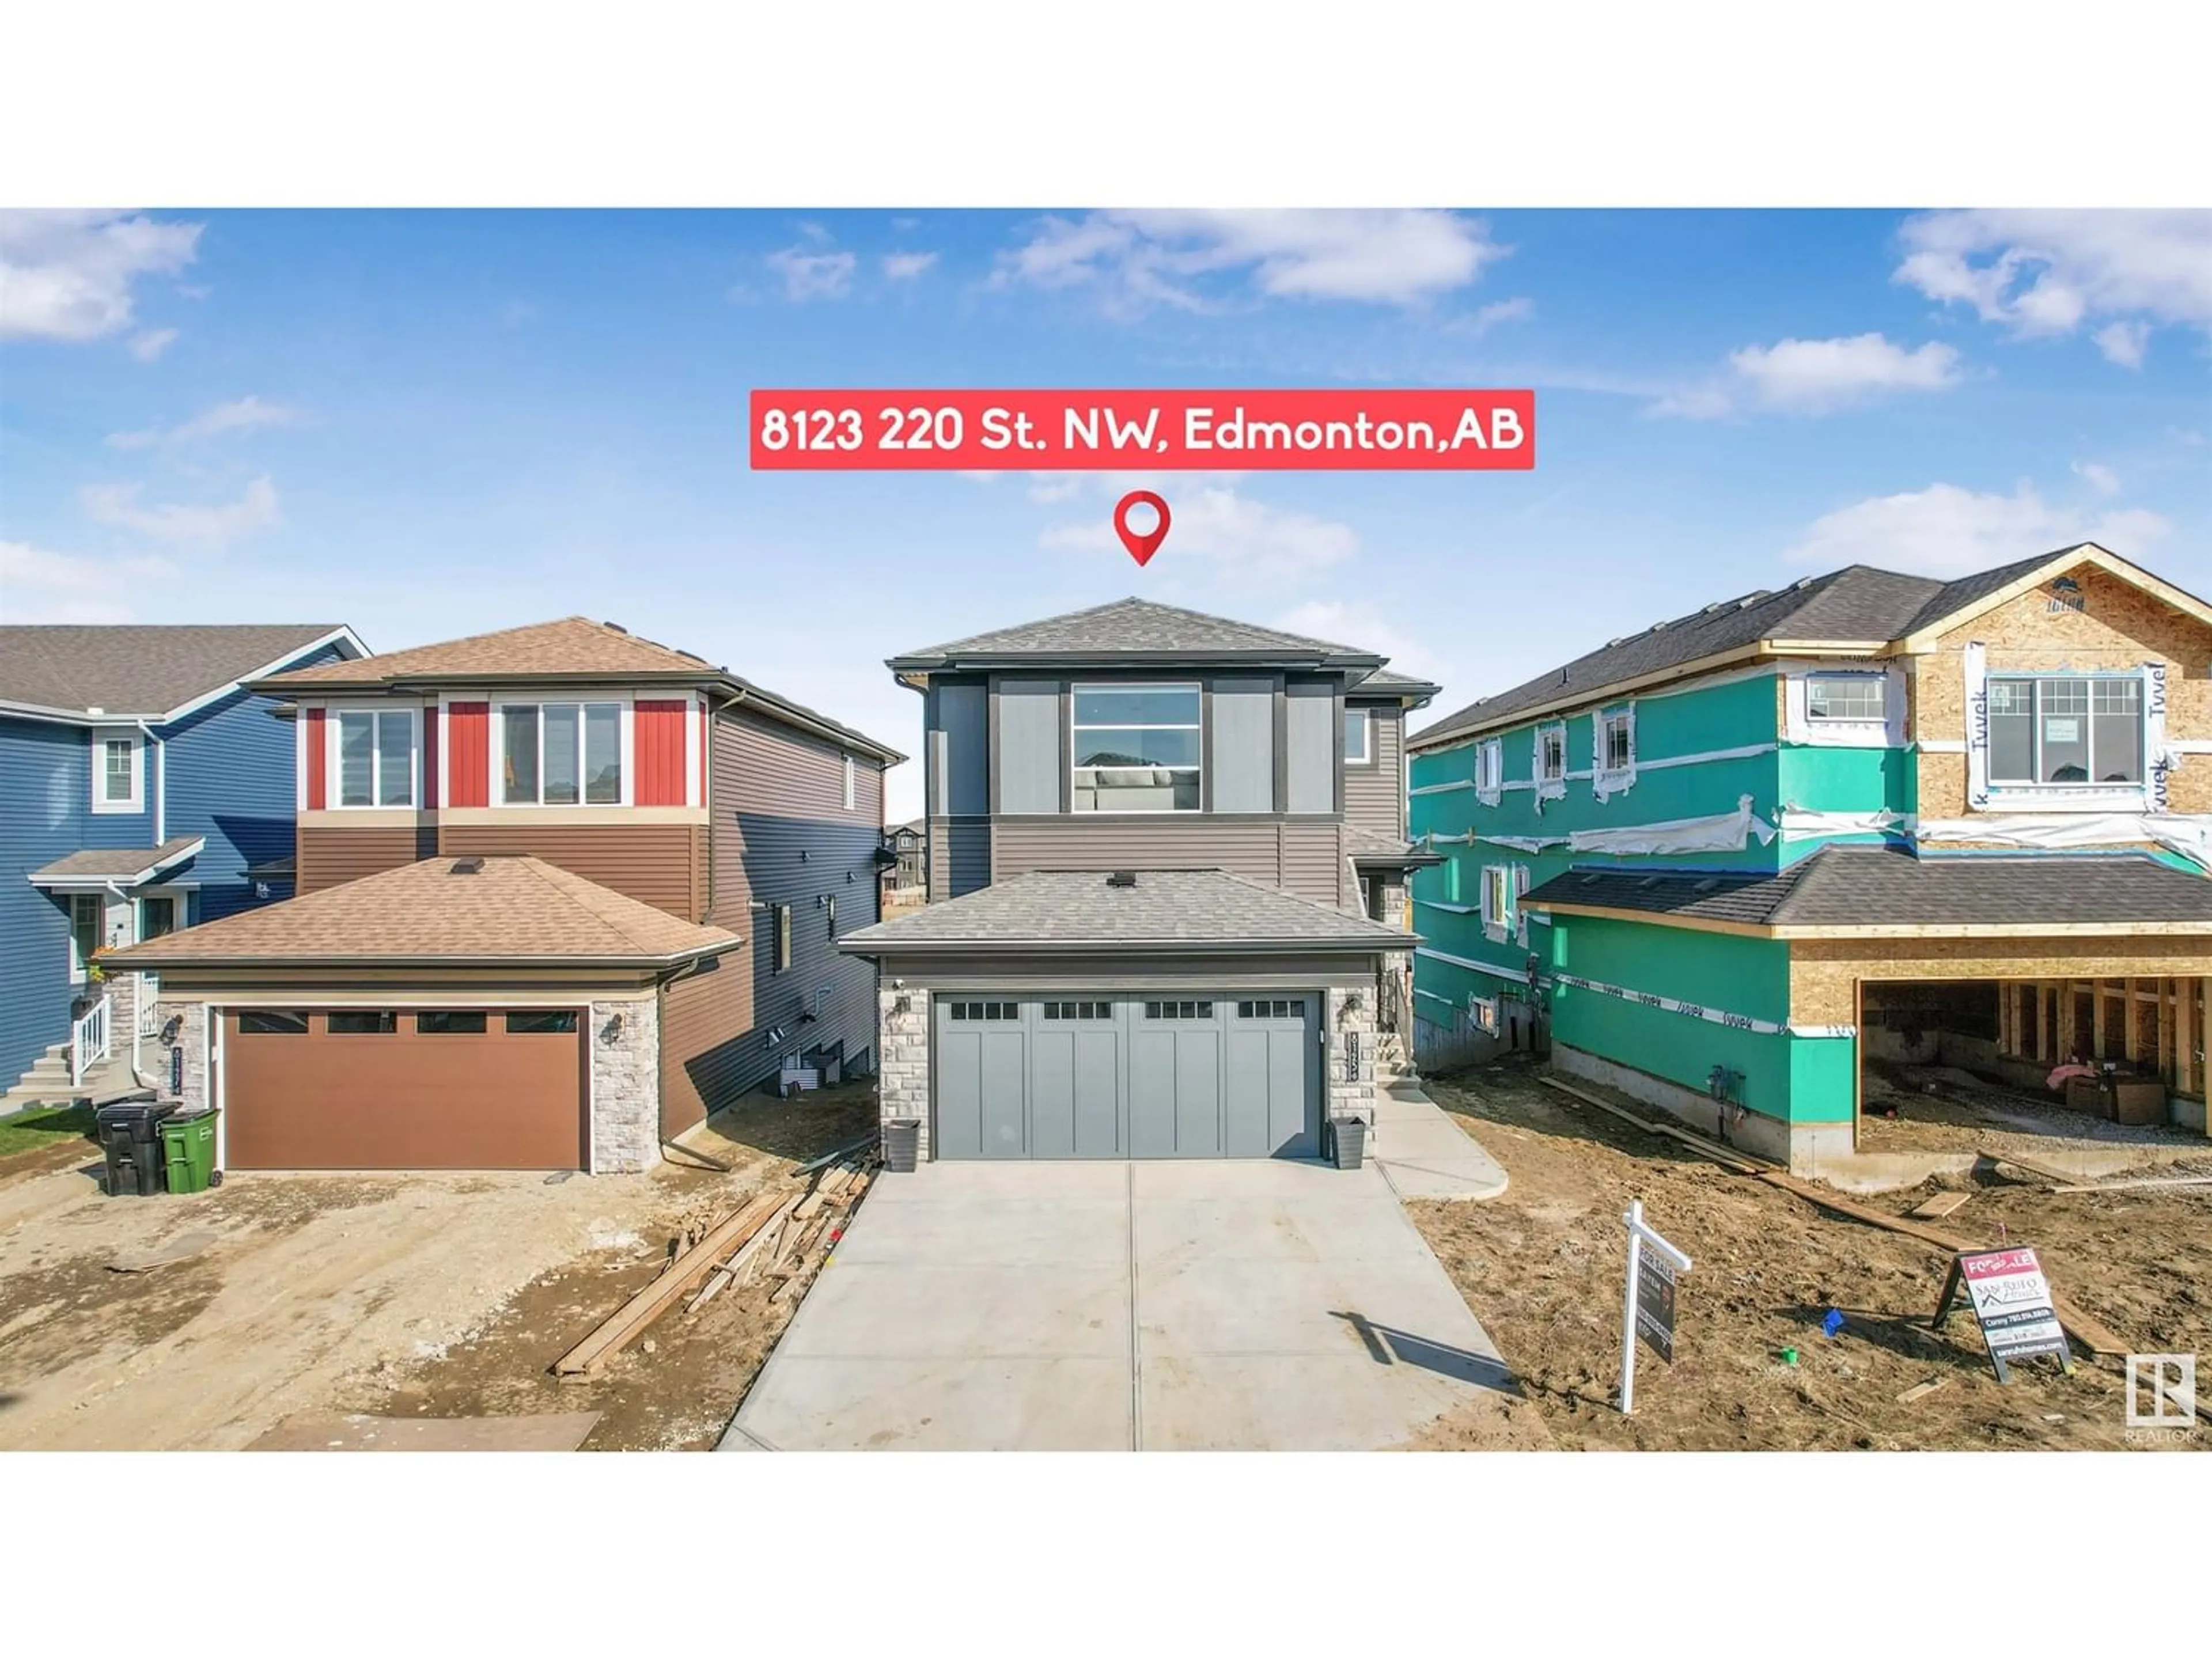 Frontside or backside of a home for 8123 220 ST NW, Edmonton Alberta T5T7T4